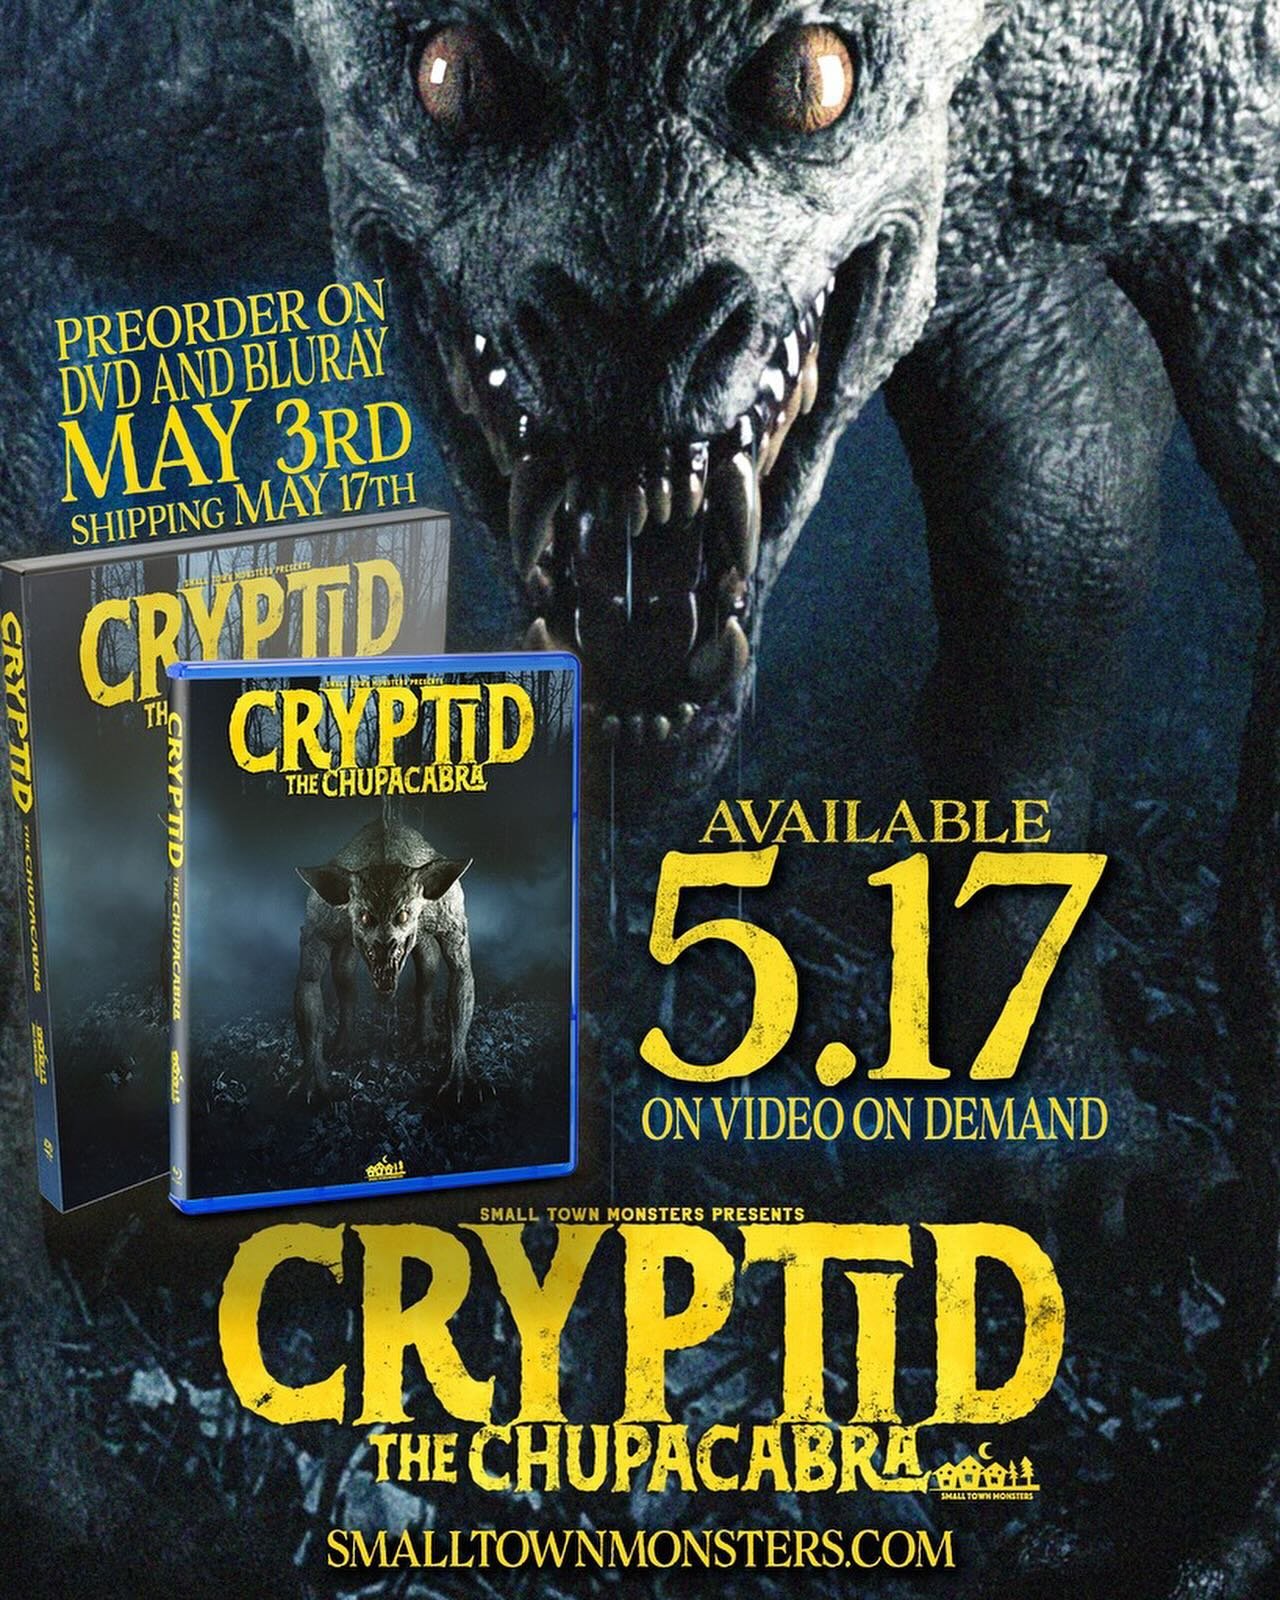 🚨MOVIE DROP🚨 Cryptid: The Chupacabra is coming to wide release on 5/17! Preorders start TOMORROW at smalltownmonsters.com/shop &amp; VOD arrives on select platforms on the 17th. Get ready - the Chupacabra is coming. 

#monsters #monster #paranormal